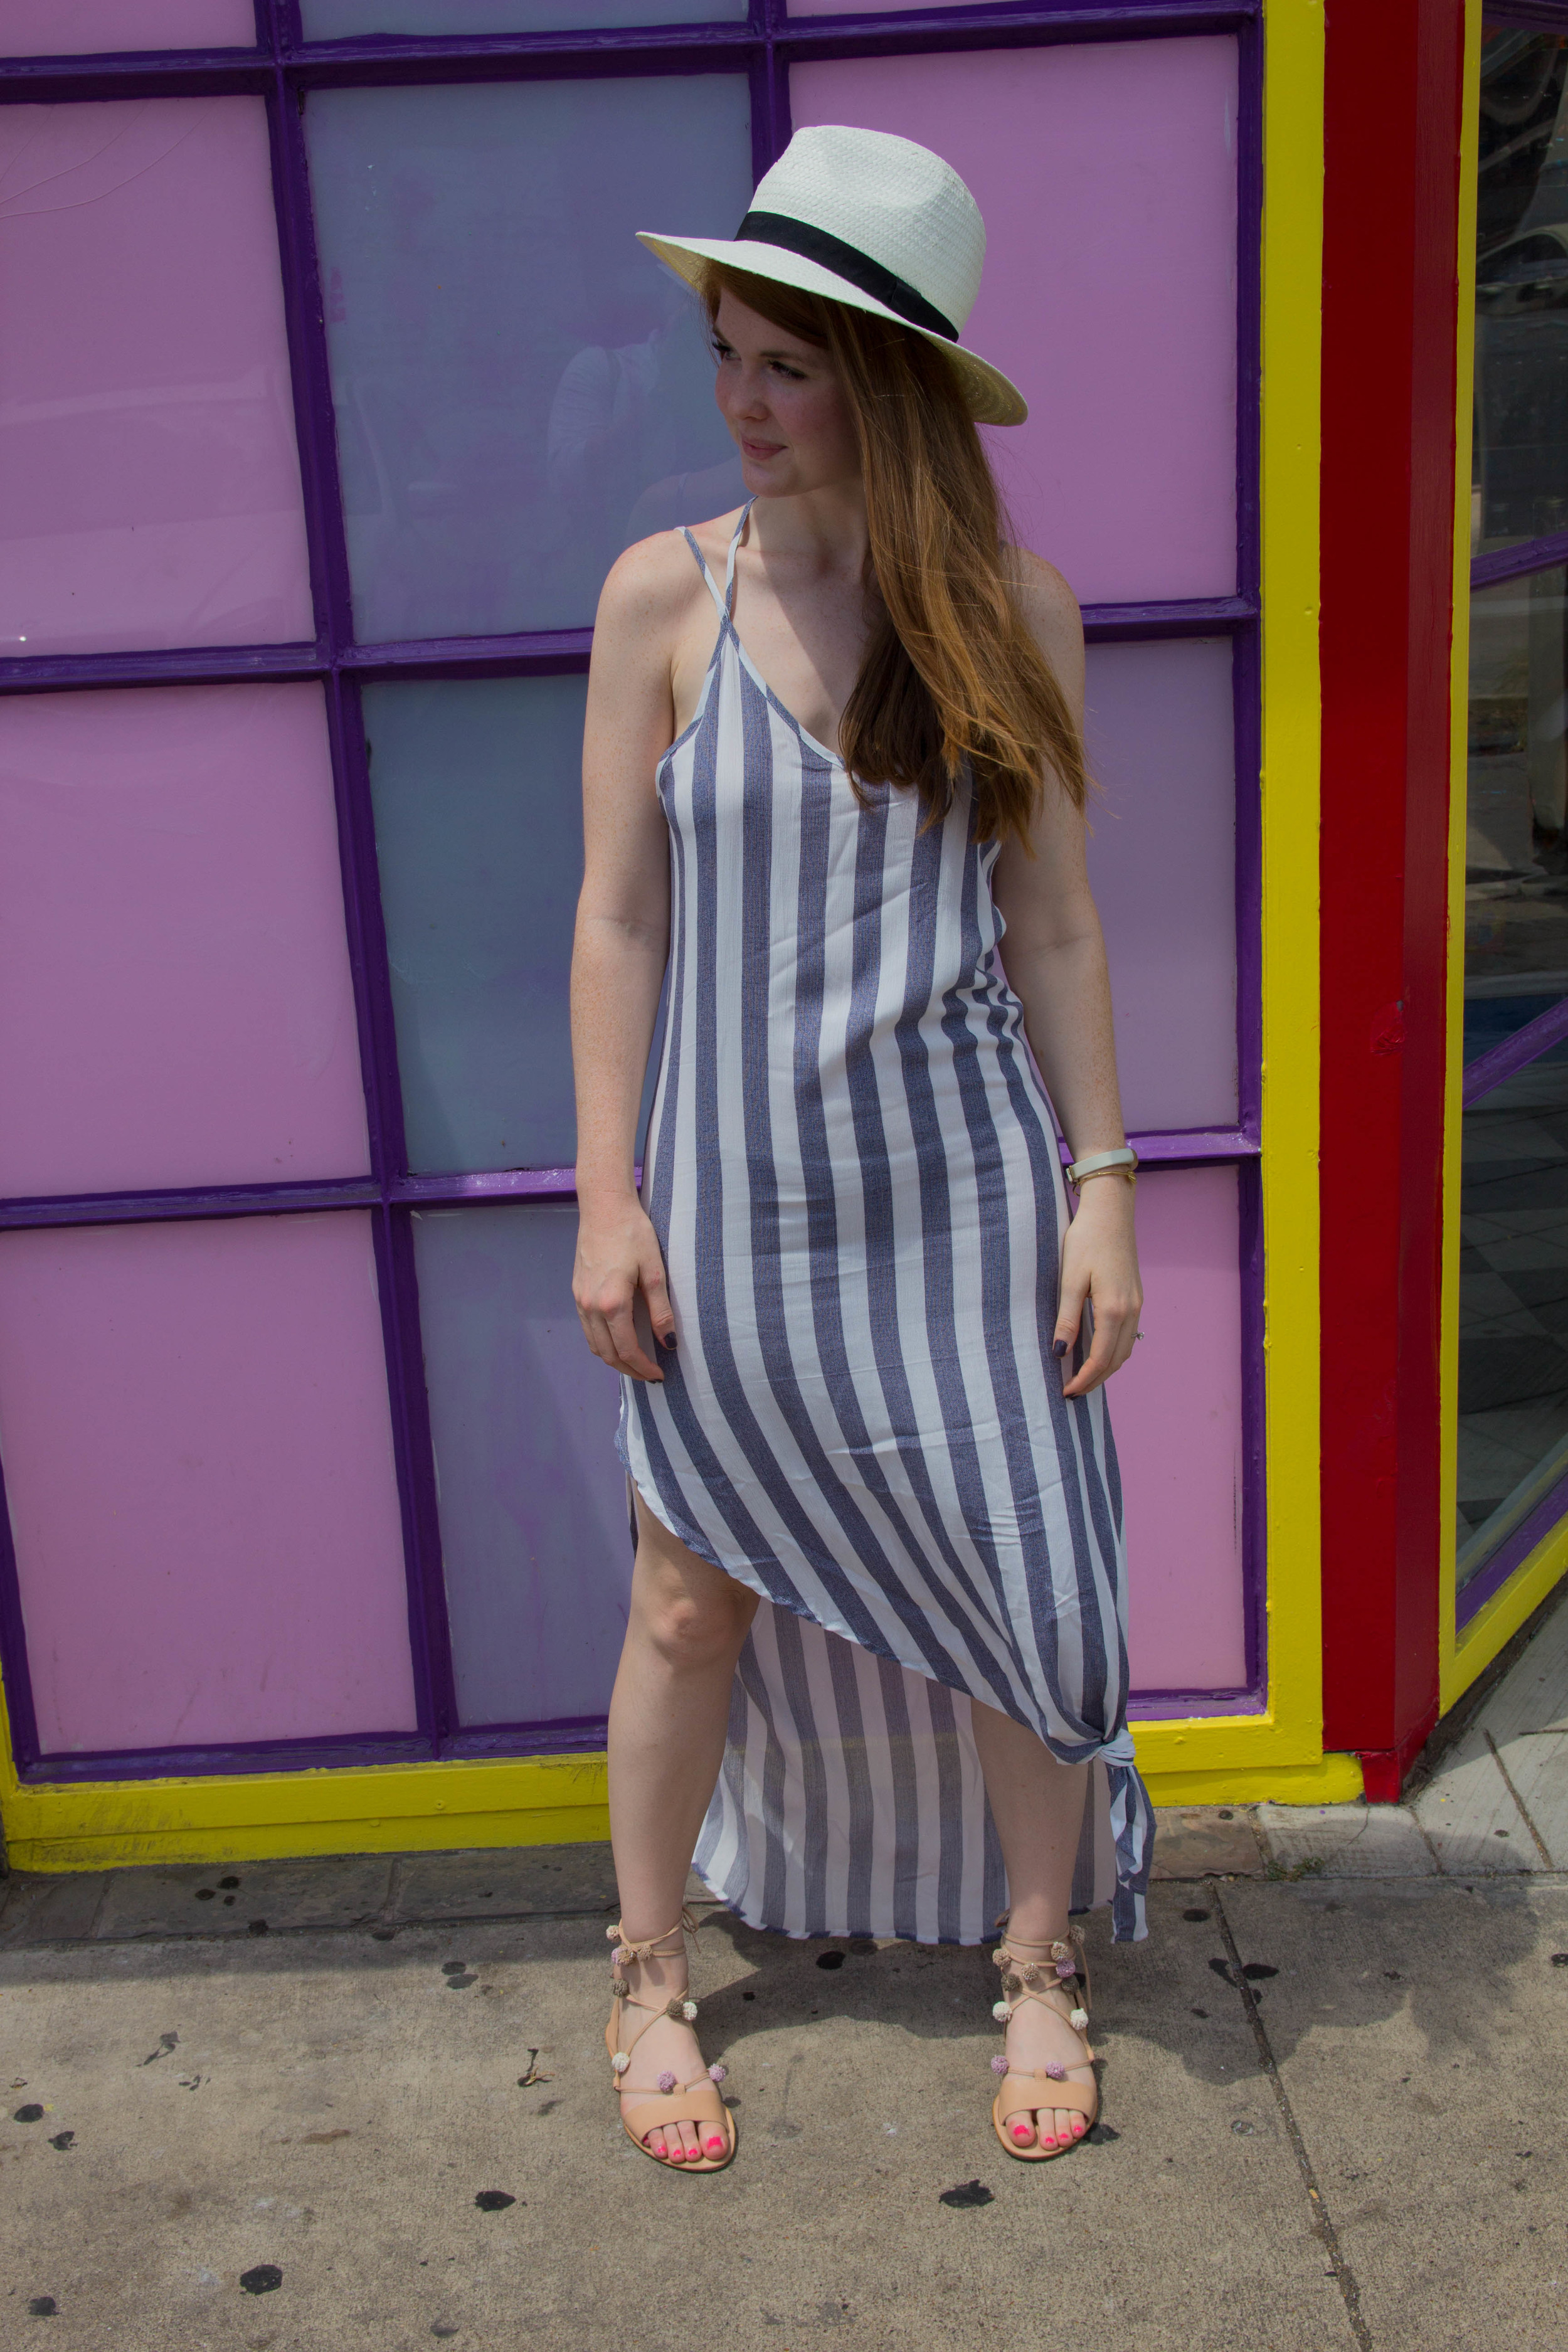 nordstrom bottom knot stripe maxi dress, asos white straw panama hat, kendra scott sophee earrings, loeffler randall lace up pom pom sandals, essie smokin hot, gold arrow cuff, how to tie a knot in clothing, knotted tank, knotted dress